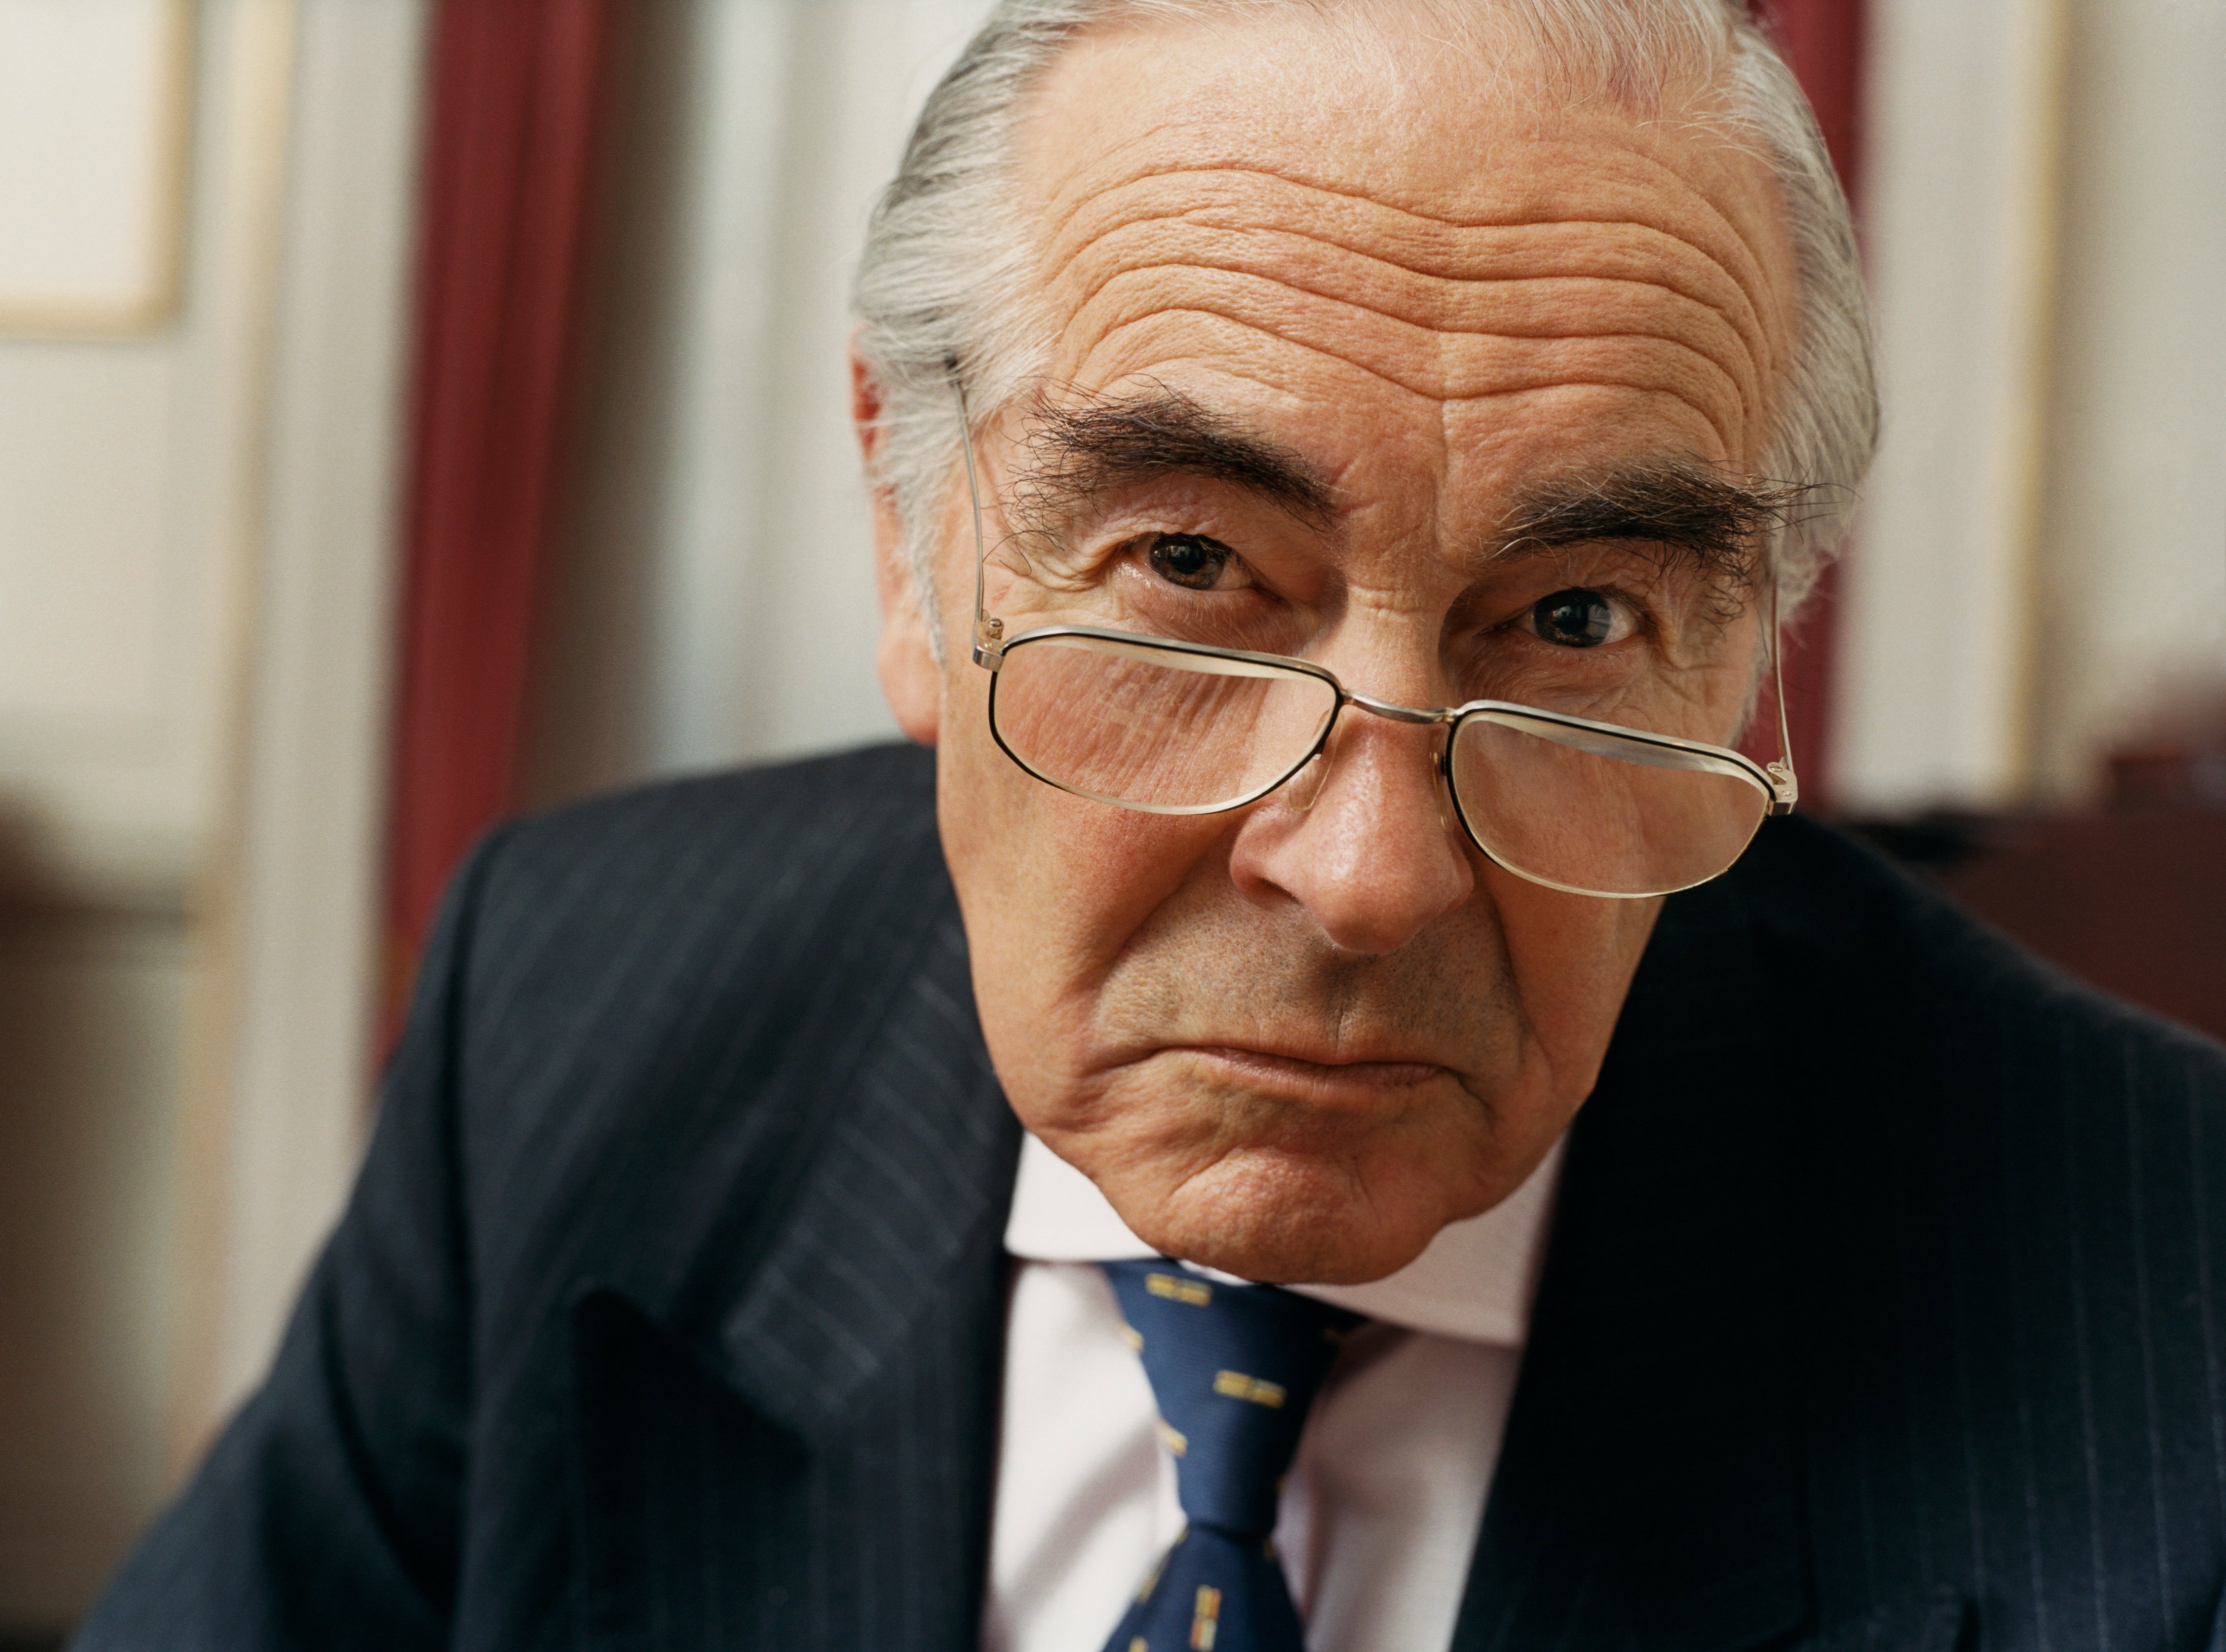 Portrait of a Sulking Businessman Wearing Spectacles and a Pinstripe Suit (Digital Vision.&mdash;Getty Images)